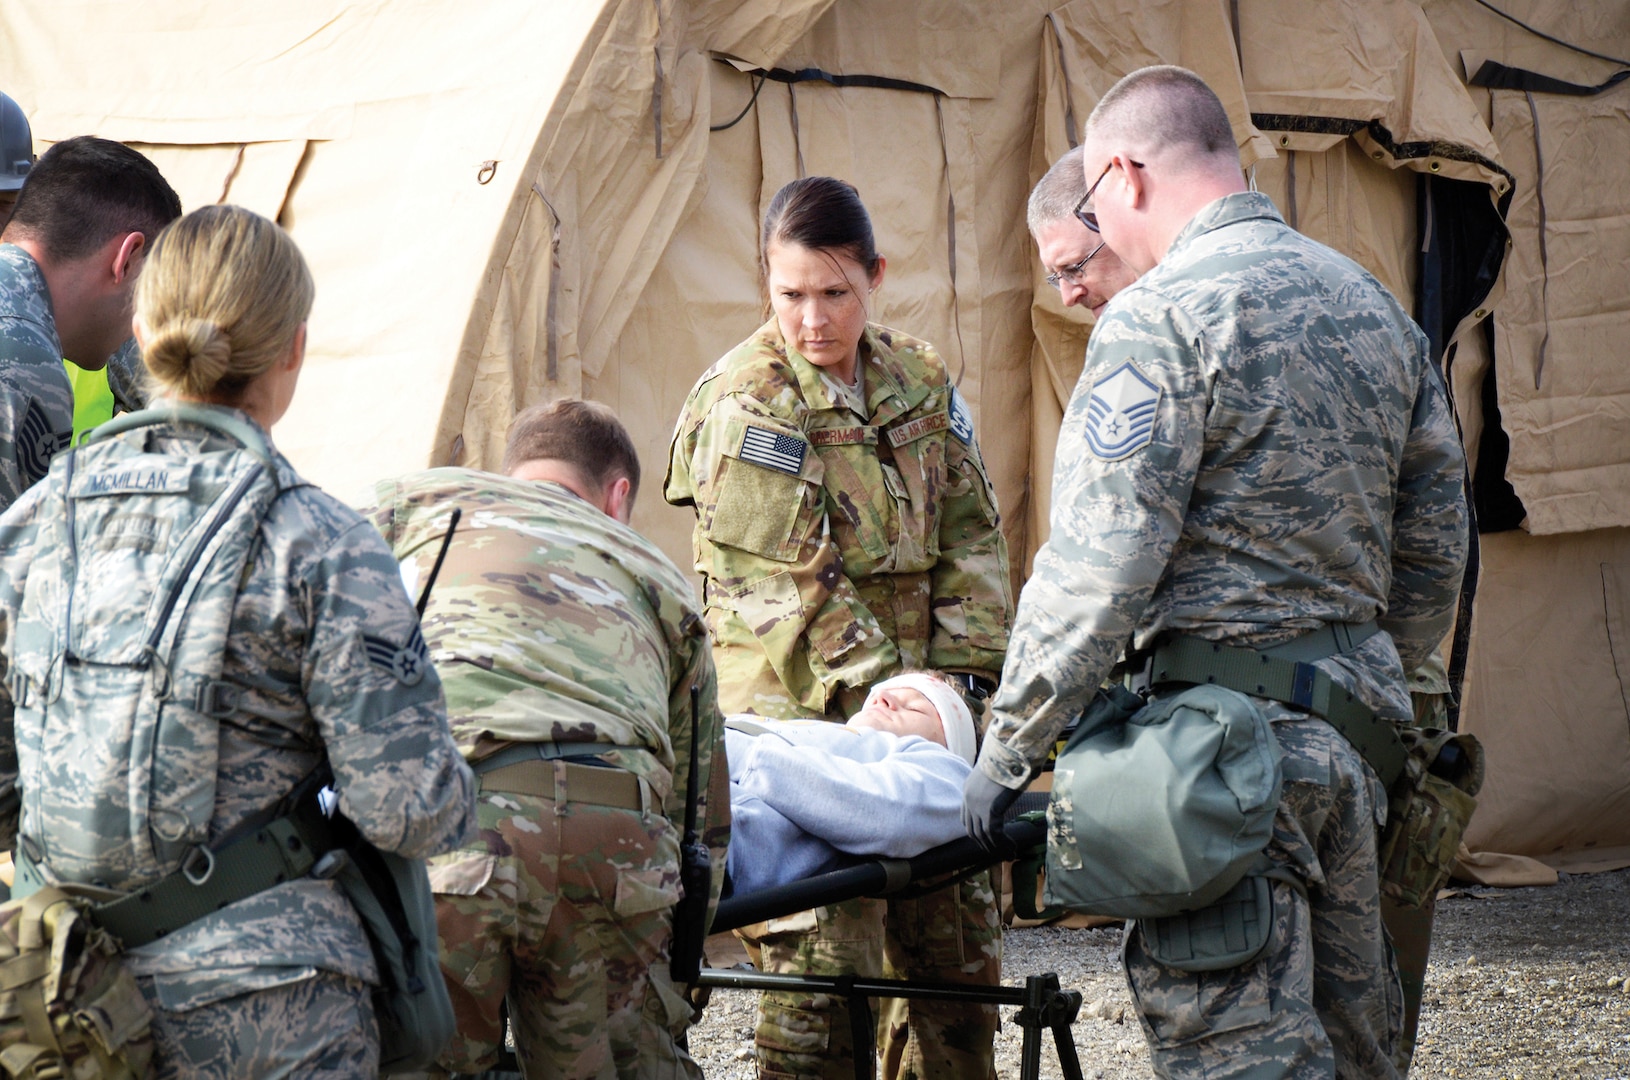 Reserve Citizen Airmen of the 445th Aeromedical Staging Squadron, prepare for patient transport during training at the Warfighter Training Center here April 6, 2019. The simulation tested the squadron’s ability to load and unload patients from aircraft while making sure they receive the best medical care for their travels.